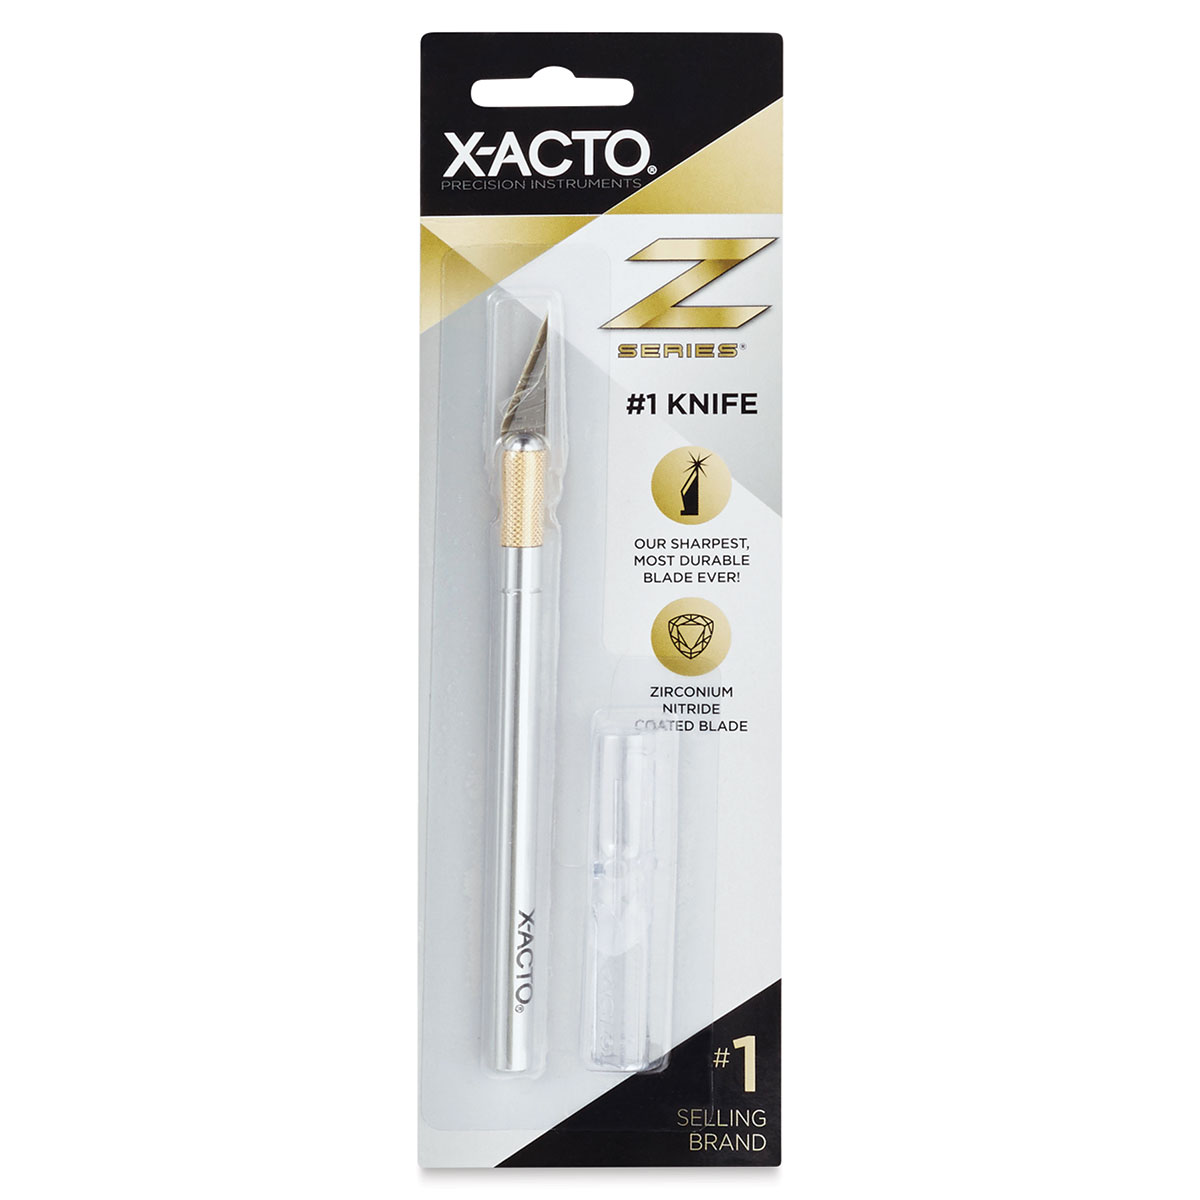 X-ACTO #1 Precision Knife with 5 #11 Blades